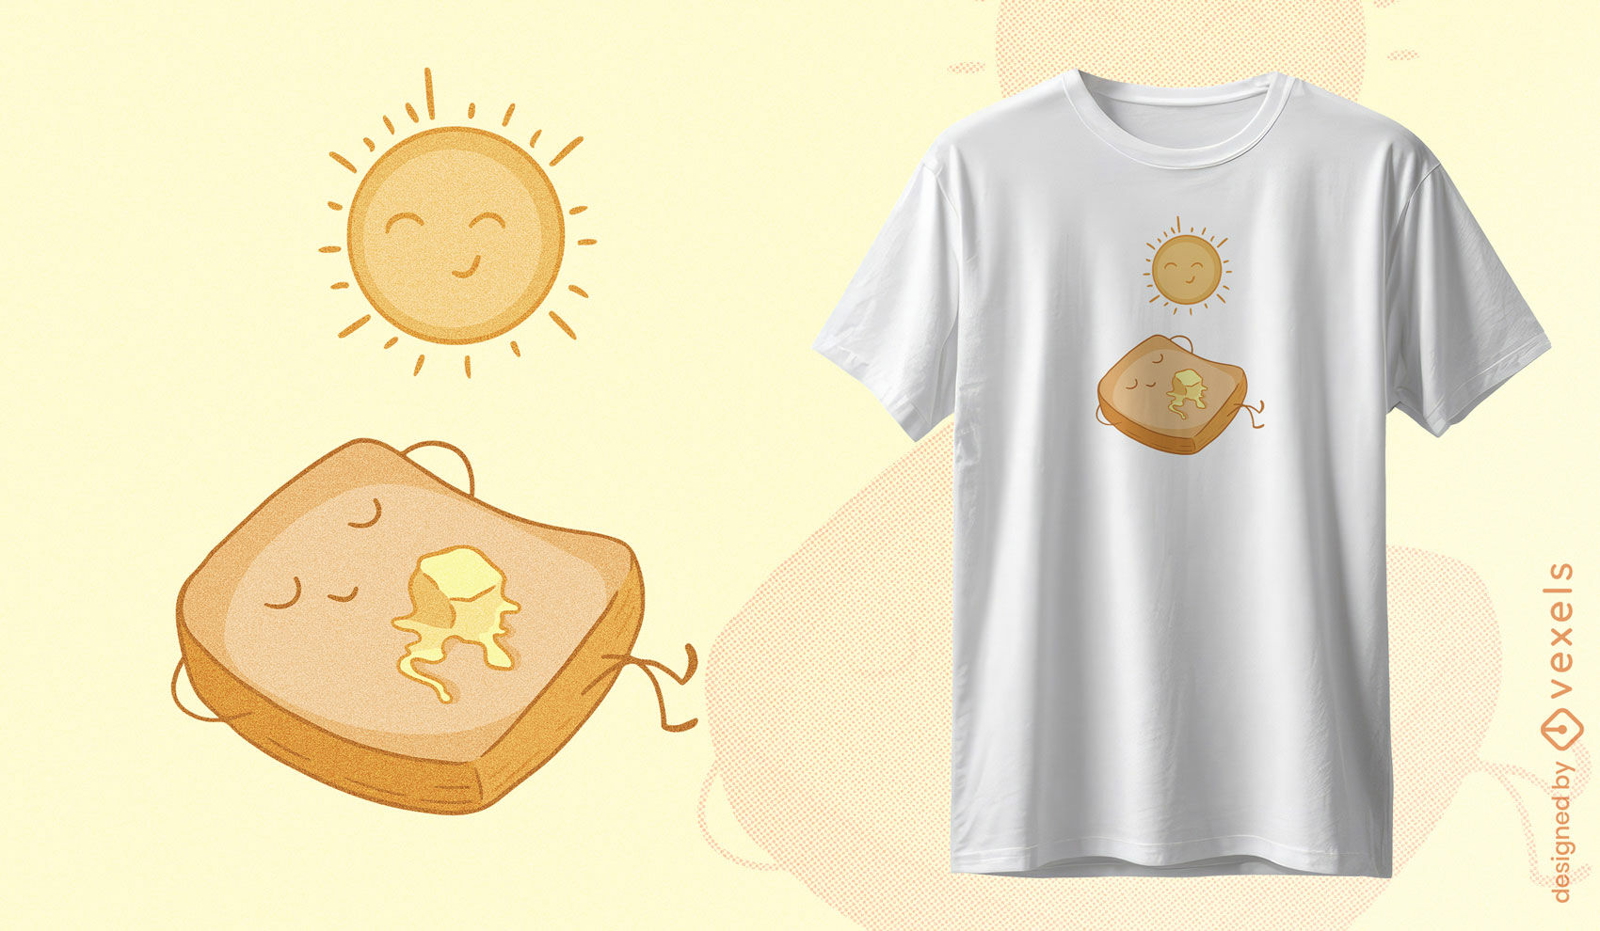 Toast and sun characters t-shirt design